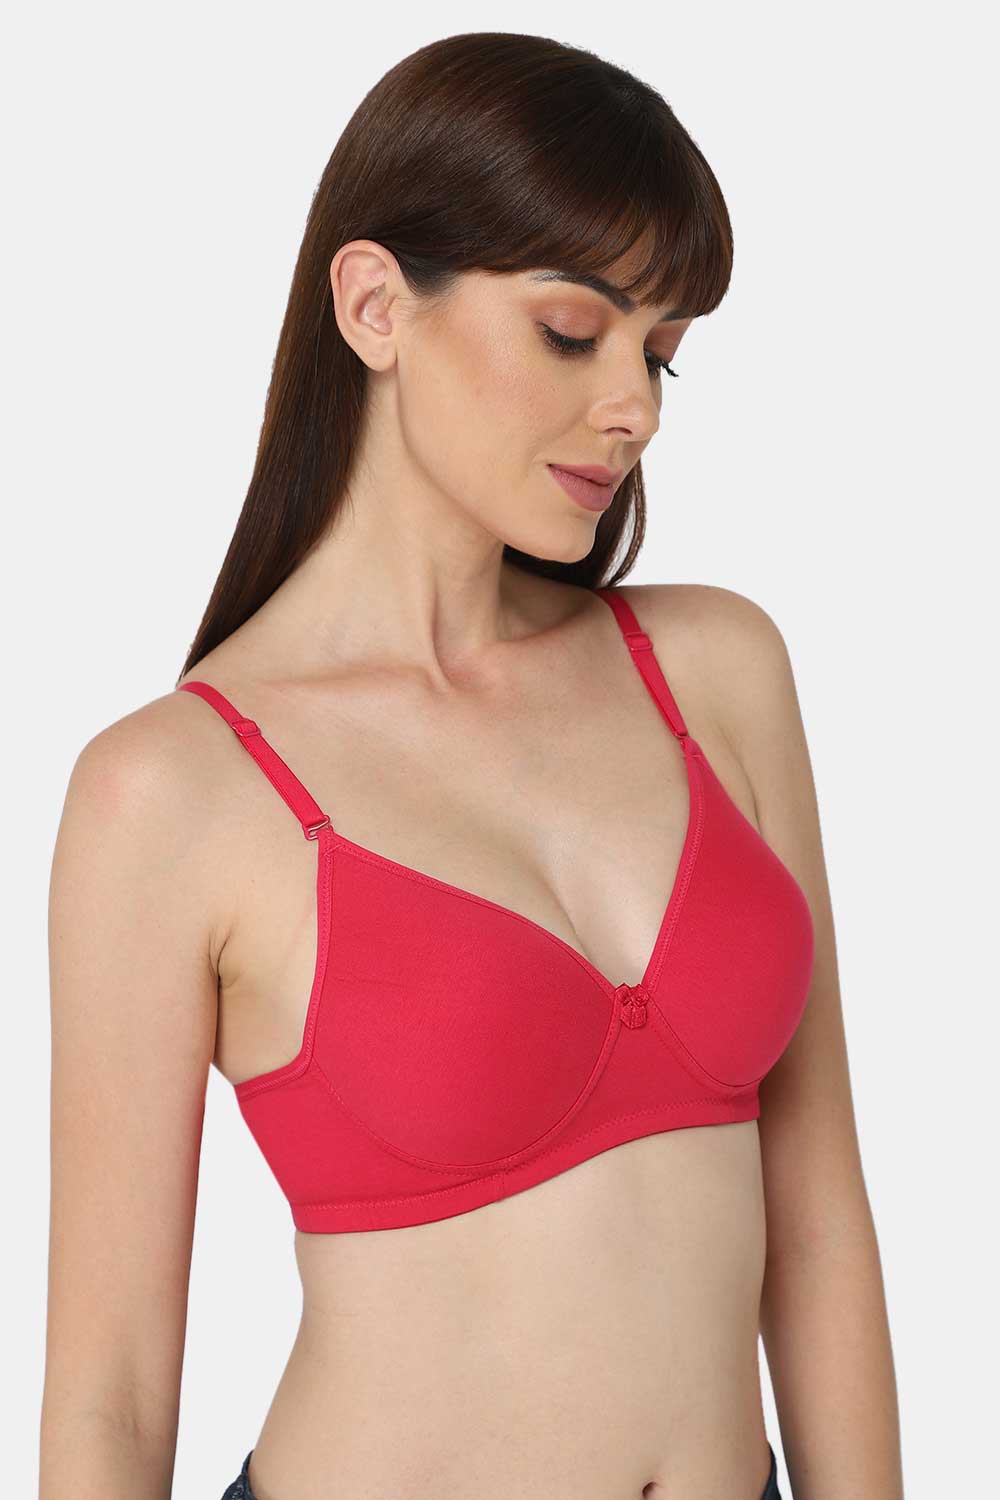 Intimacy Non-Wired Thin & Adjustable T-Shirt Padded Bra- Pink